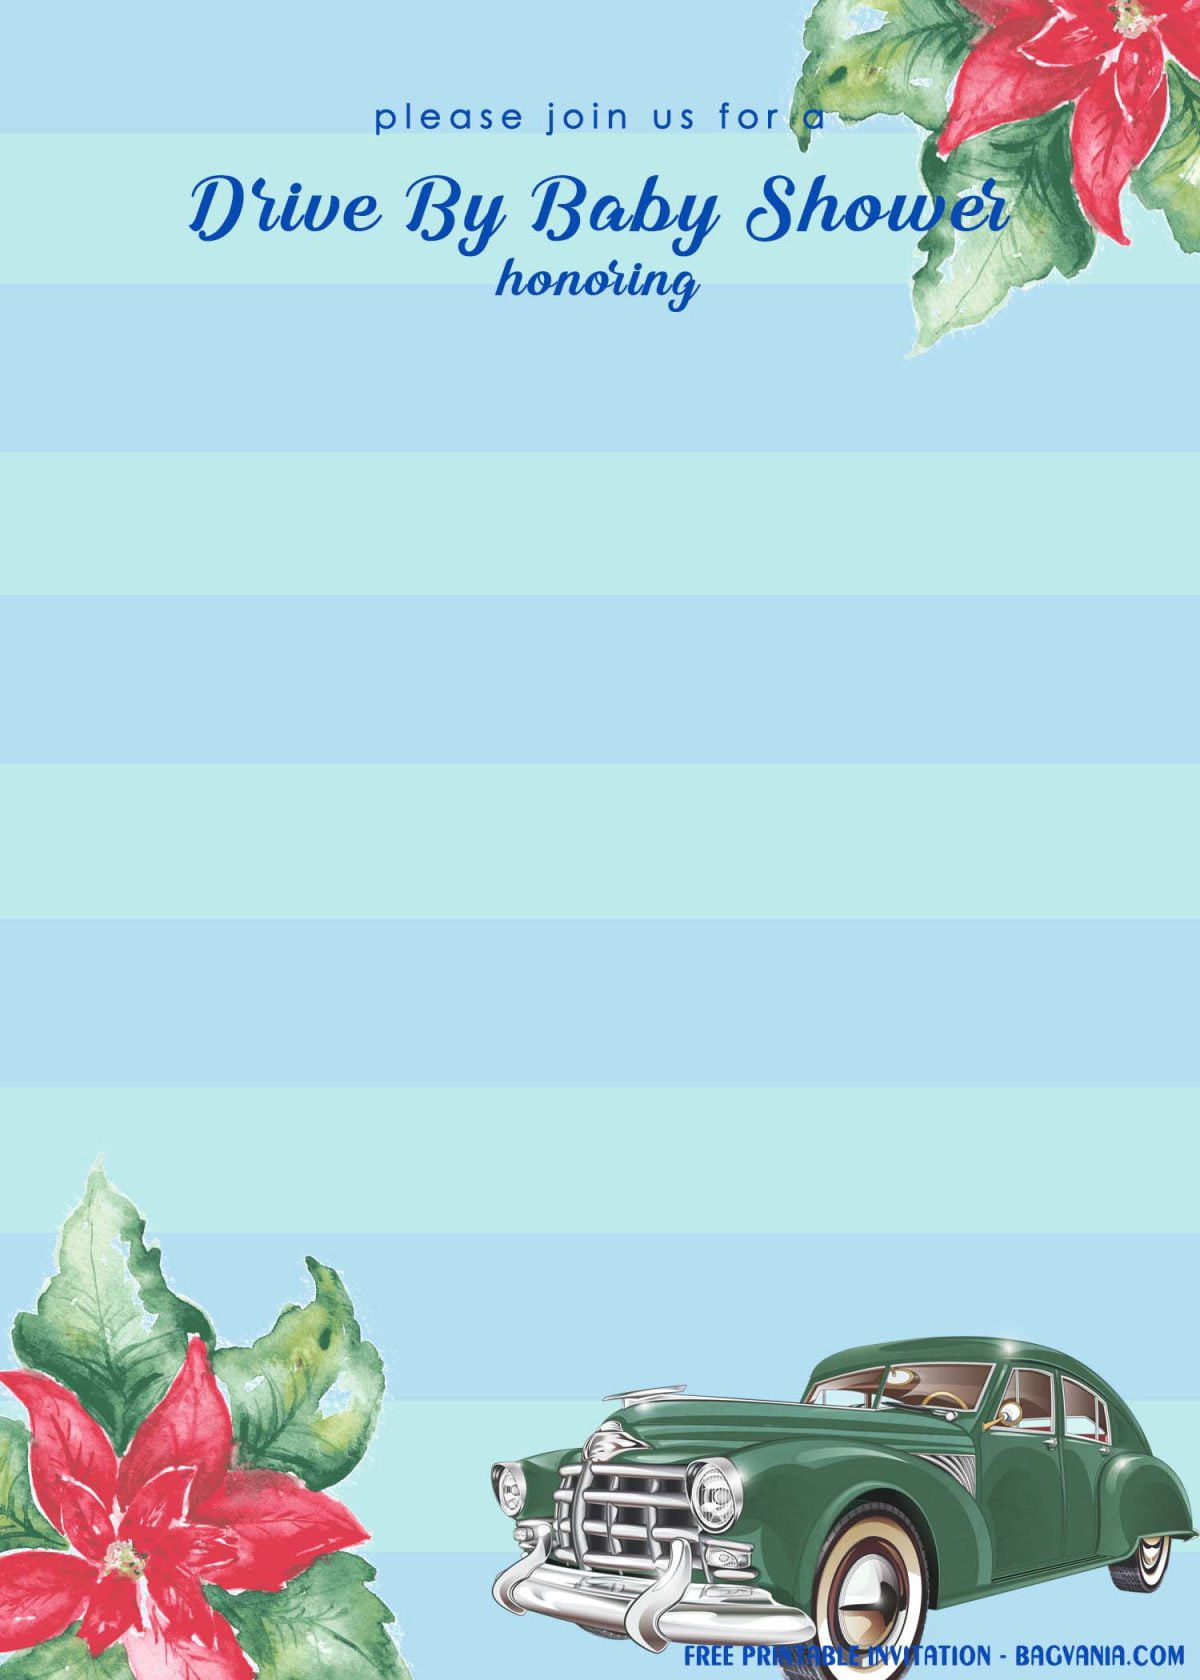 Free Printable Blue Stripes Drive By Baby Shower Invitation Templates With Green Foliage